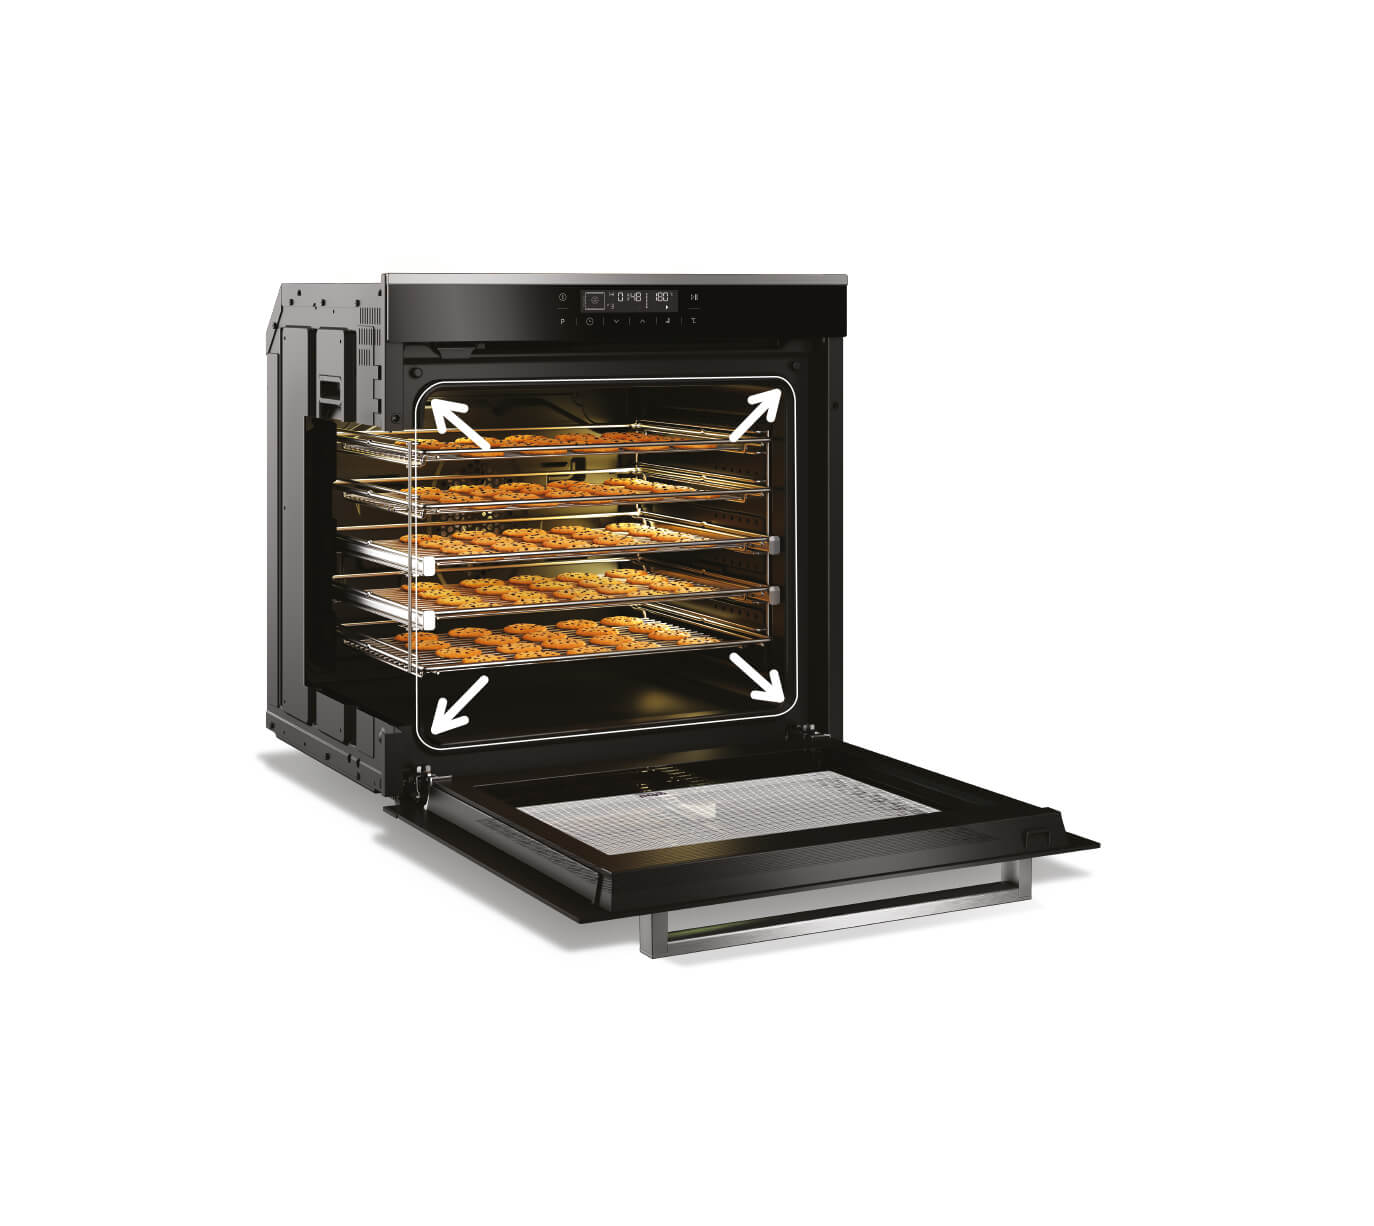 Large 71L Oven Capacity